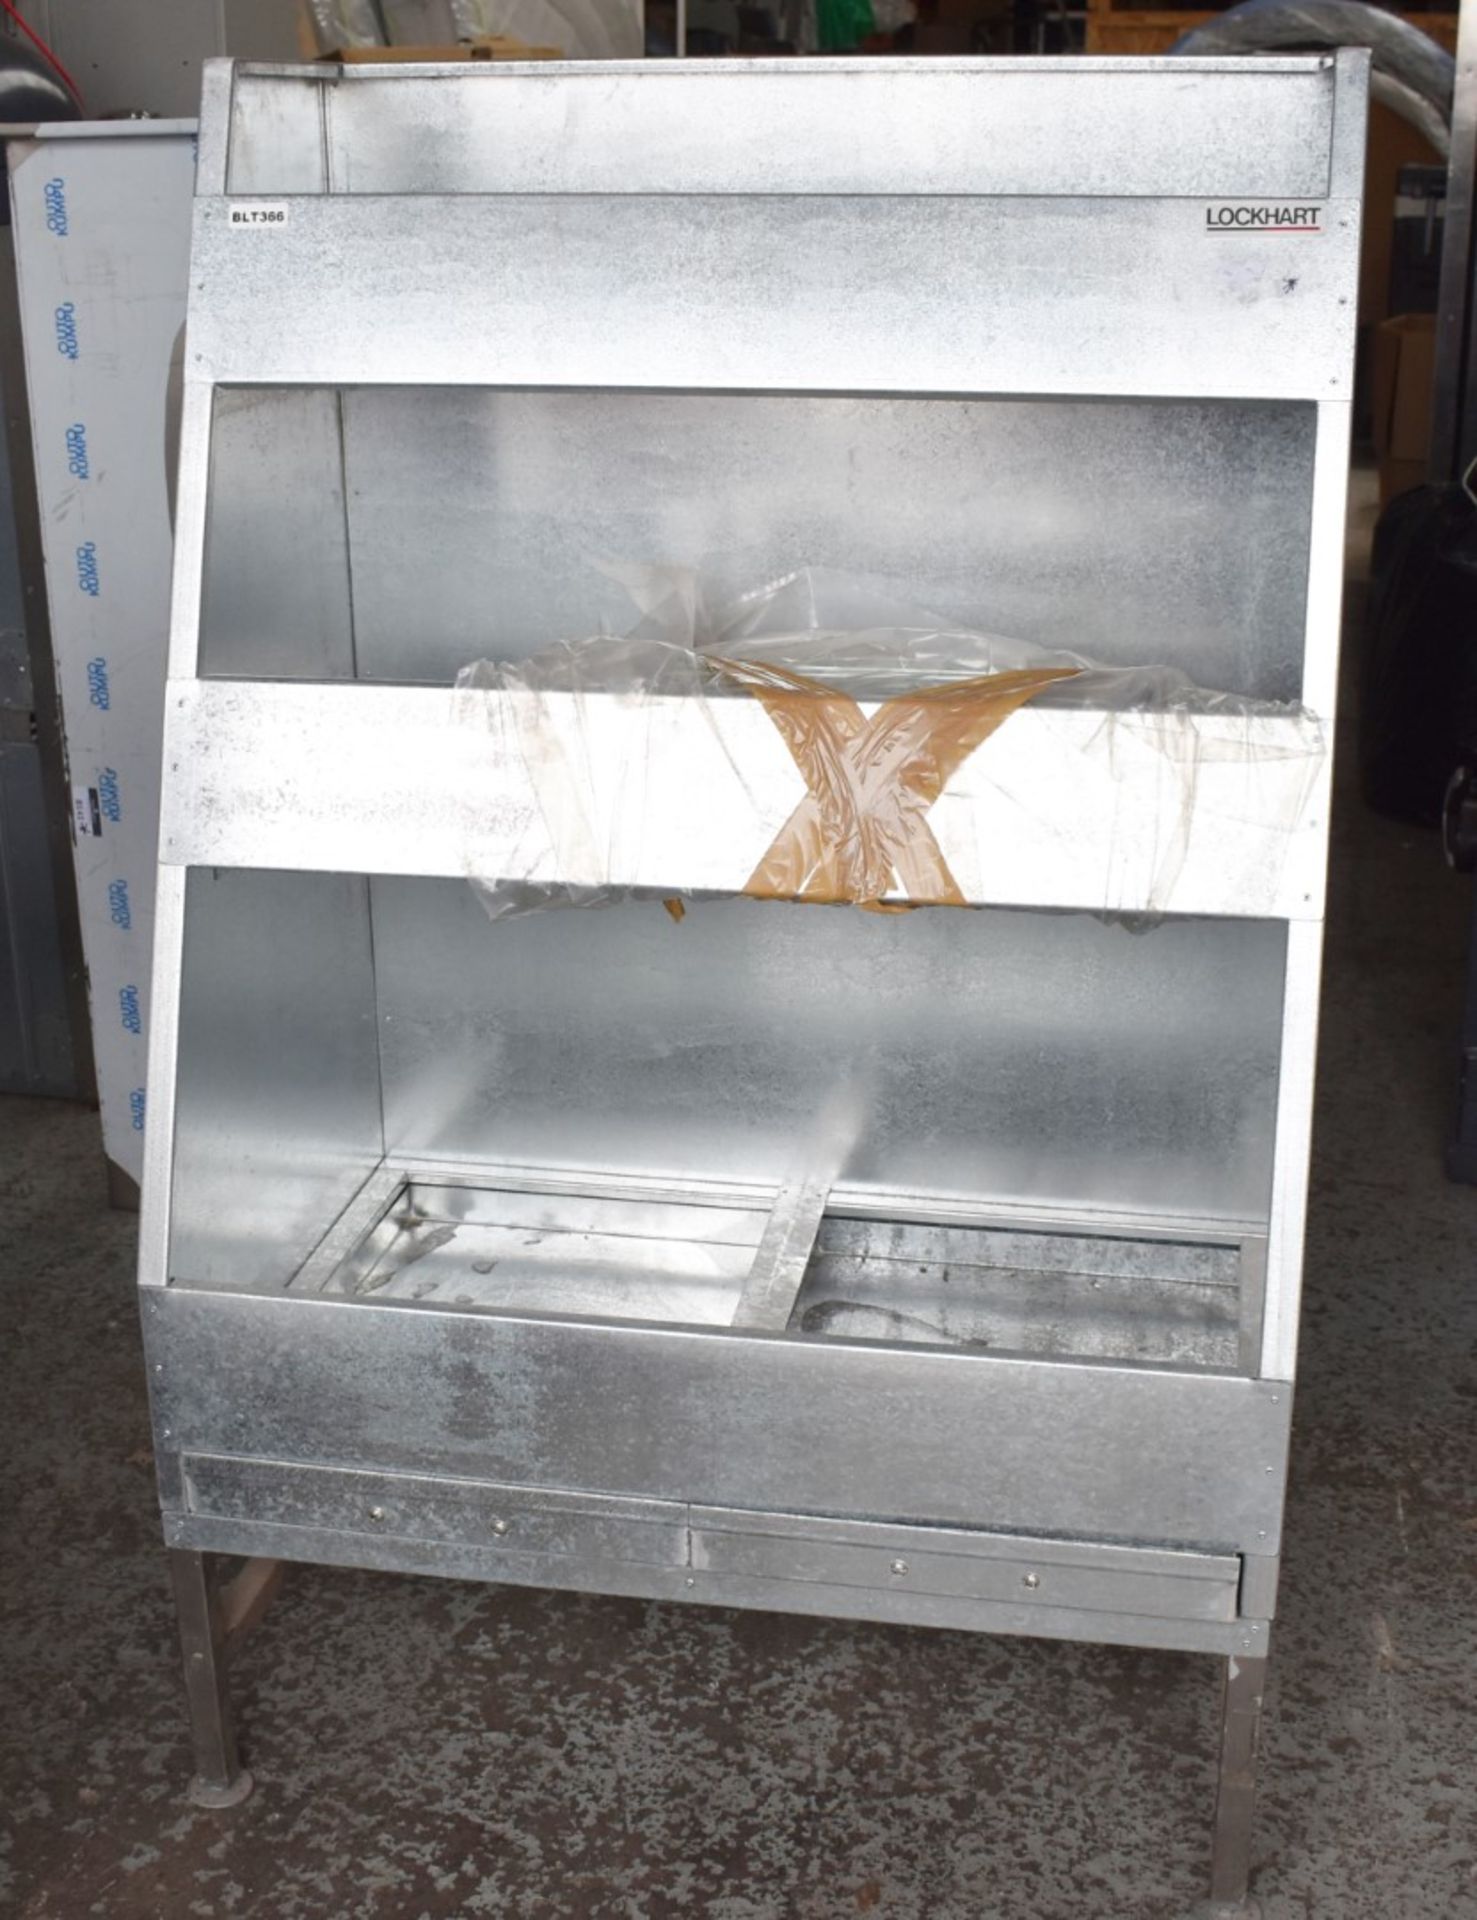 1 x Lockhart Three Tier Vegetable Rack - Galvanised Steel With Spillage Drawers and Wire Removable - Image 3 of 8